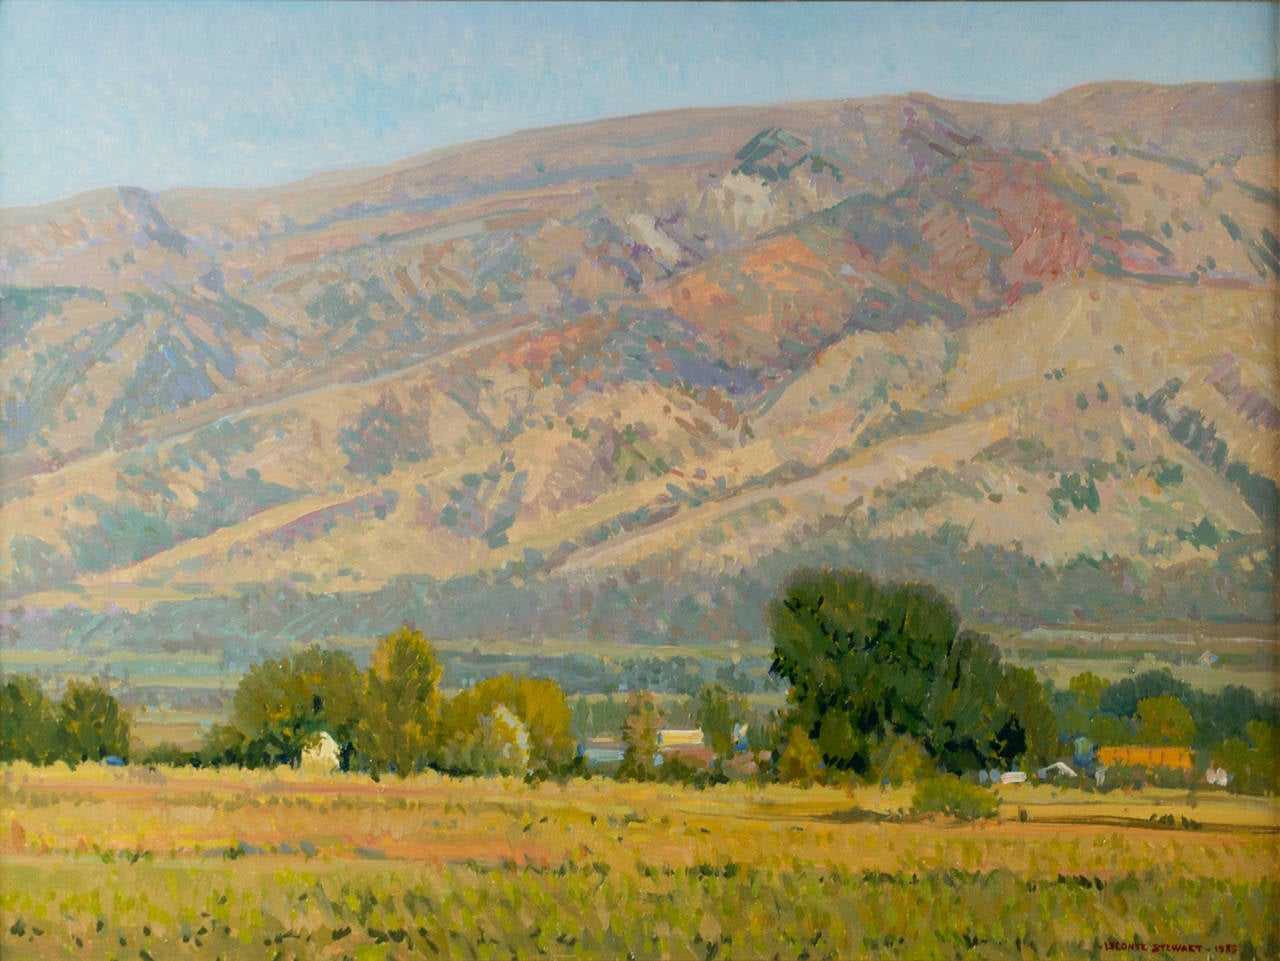 Early Autumn in the Wasatch Mountains - Painting by LeConte Stewart